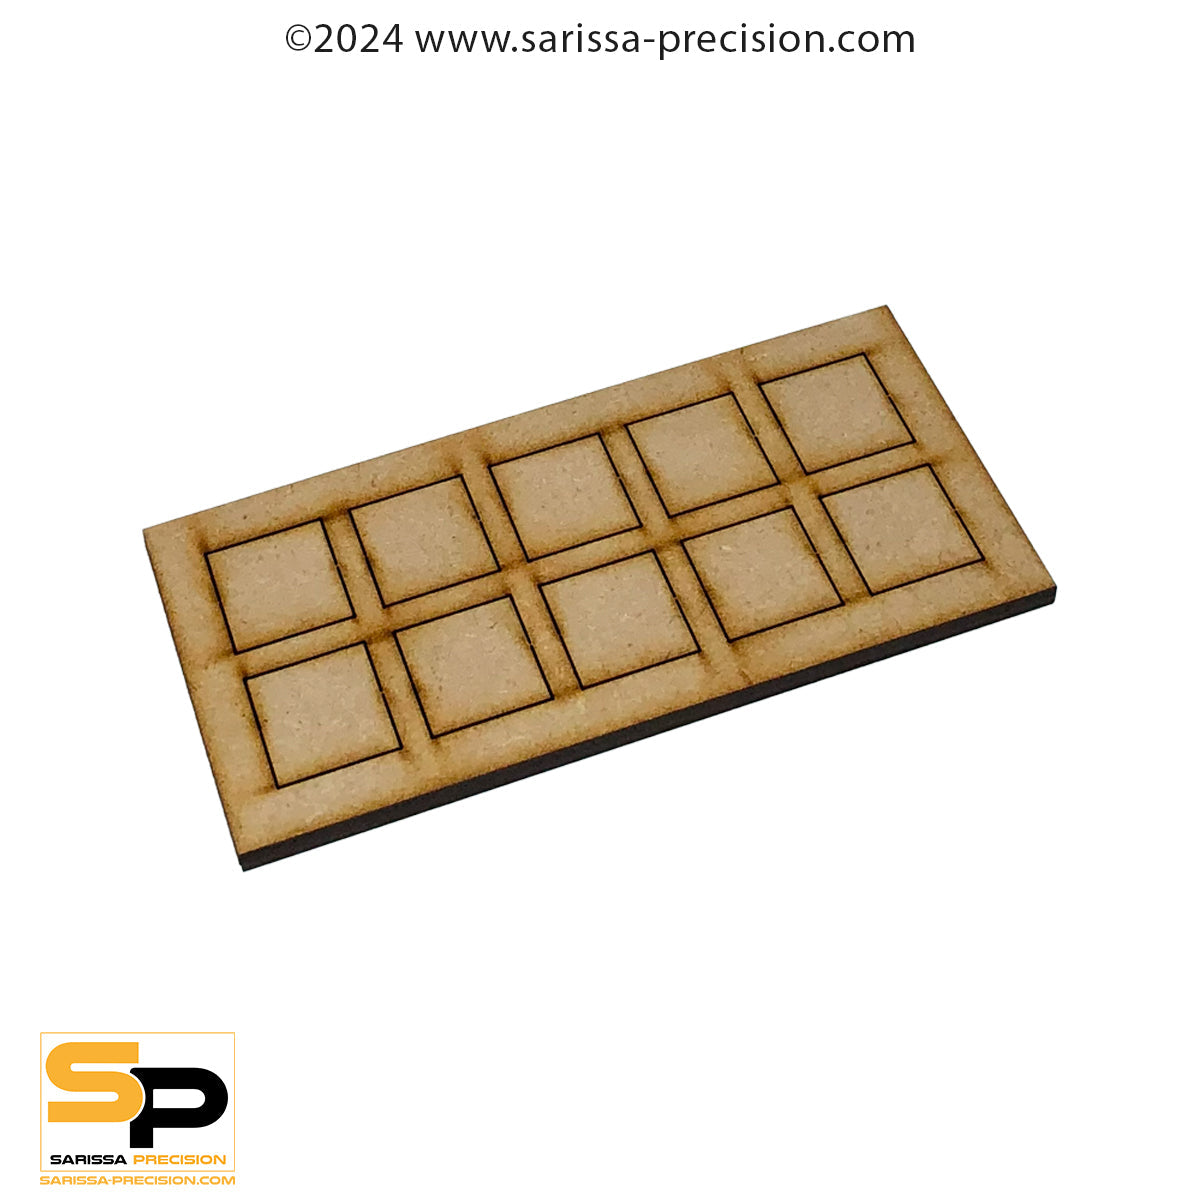 13x6 25x25mm Conversion Tray for 20x20mm bases